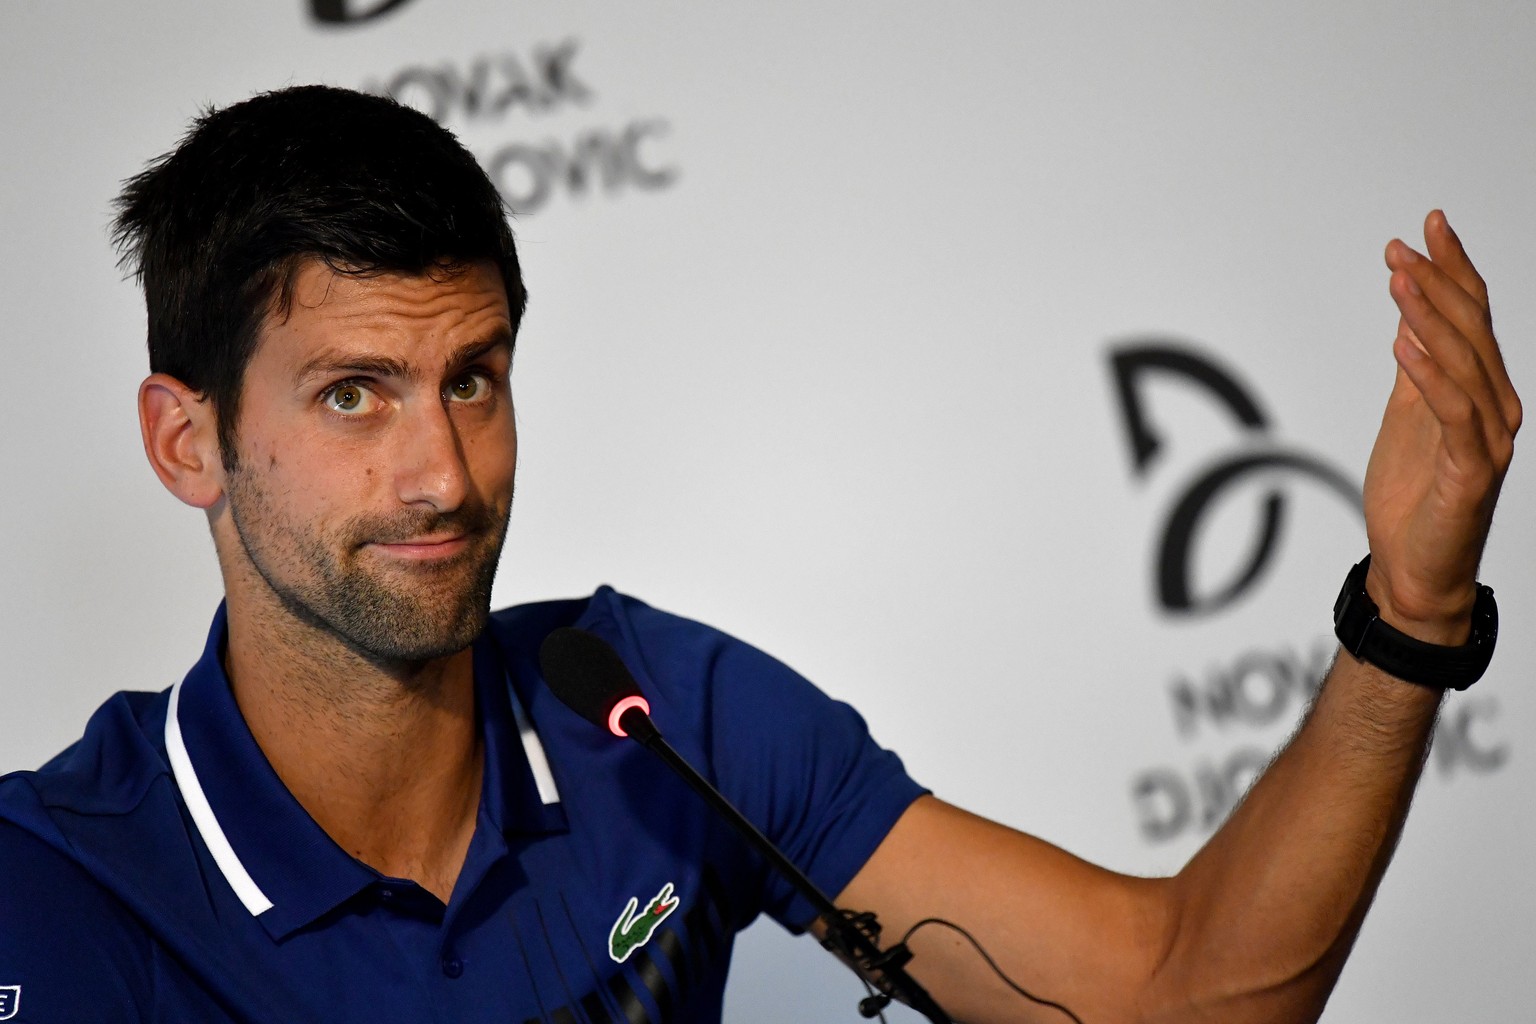 epa06110806 Serbian tennis player Novak Djokovic speaks during a press conference in Belgrade, Serbia, on 26 July 2017. Djokovic announced that he will not play again in the 2017 season due to an elbo ...